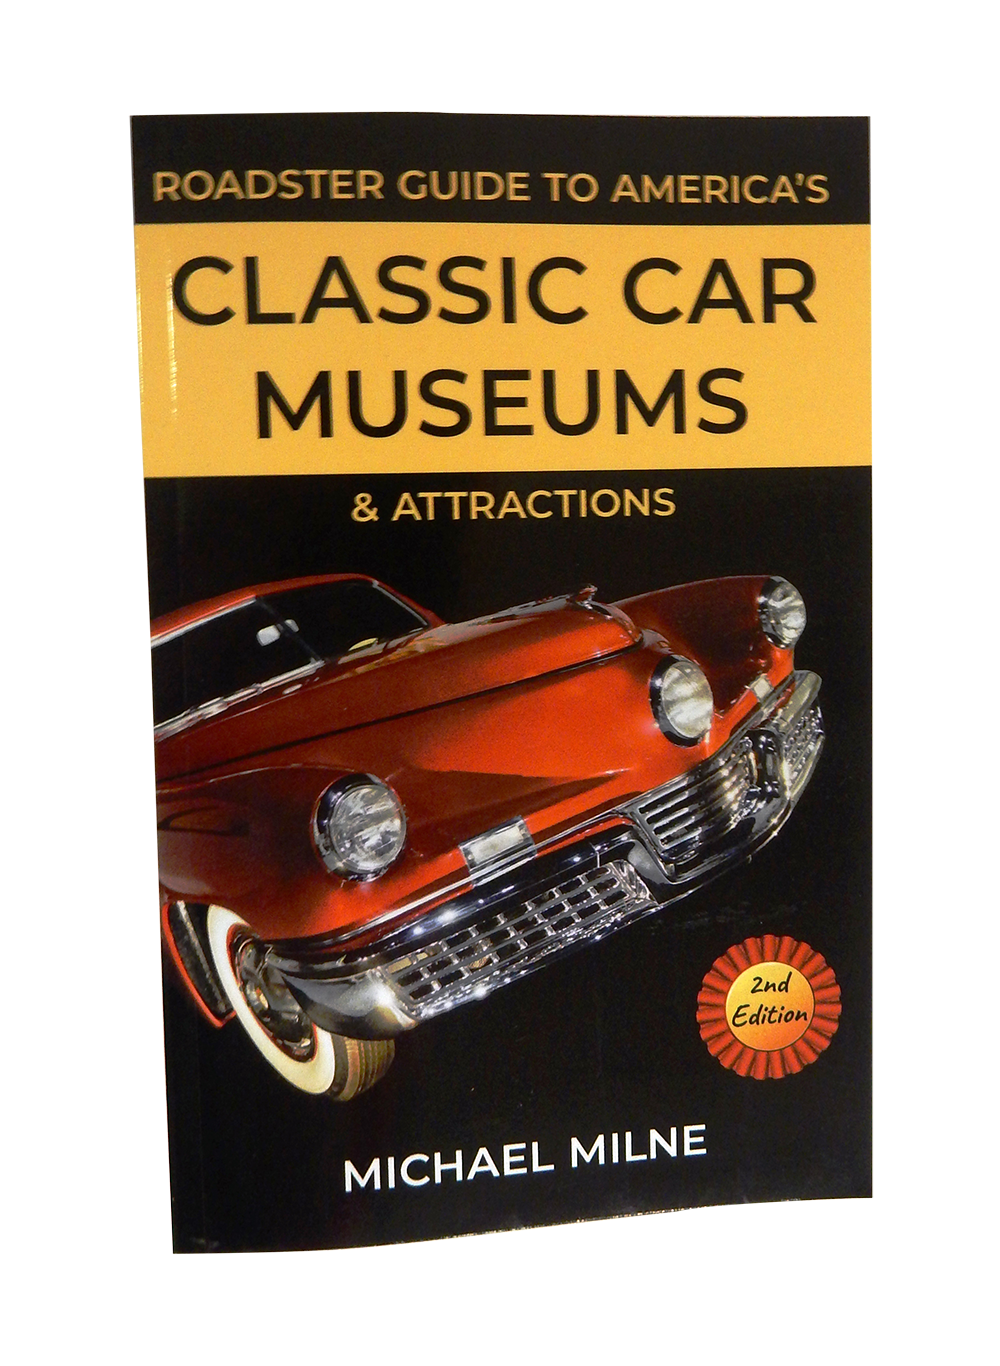 ROADSTER GUIDE TO MUSEUMS